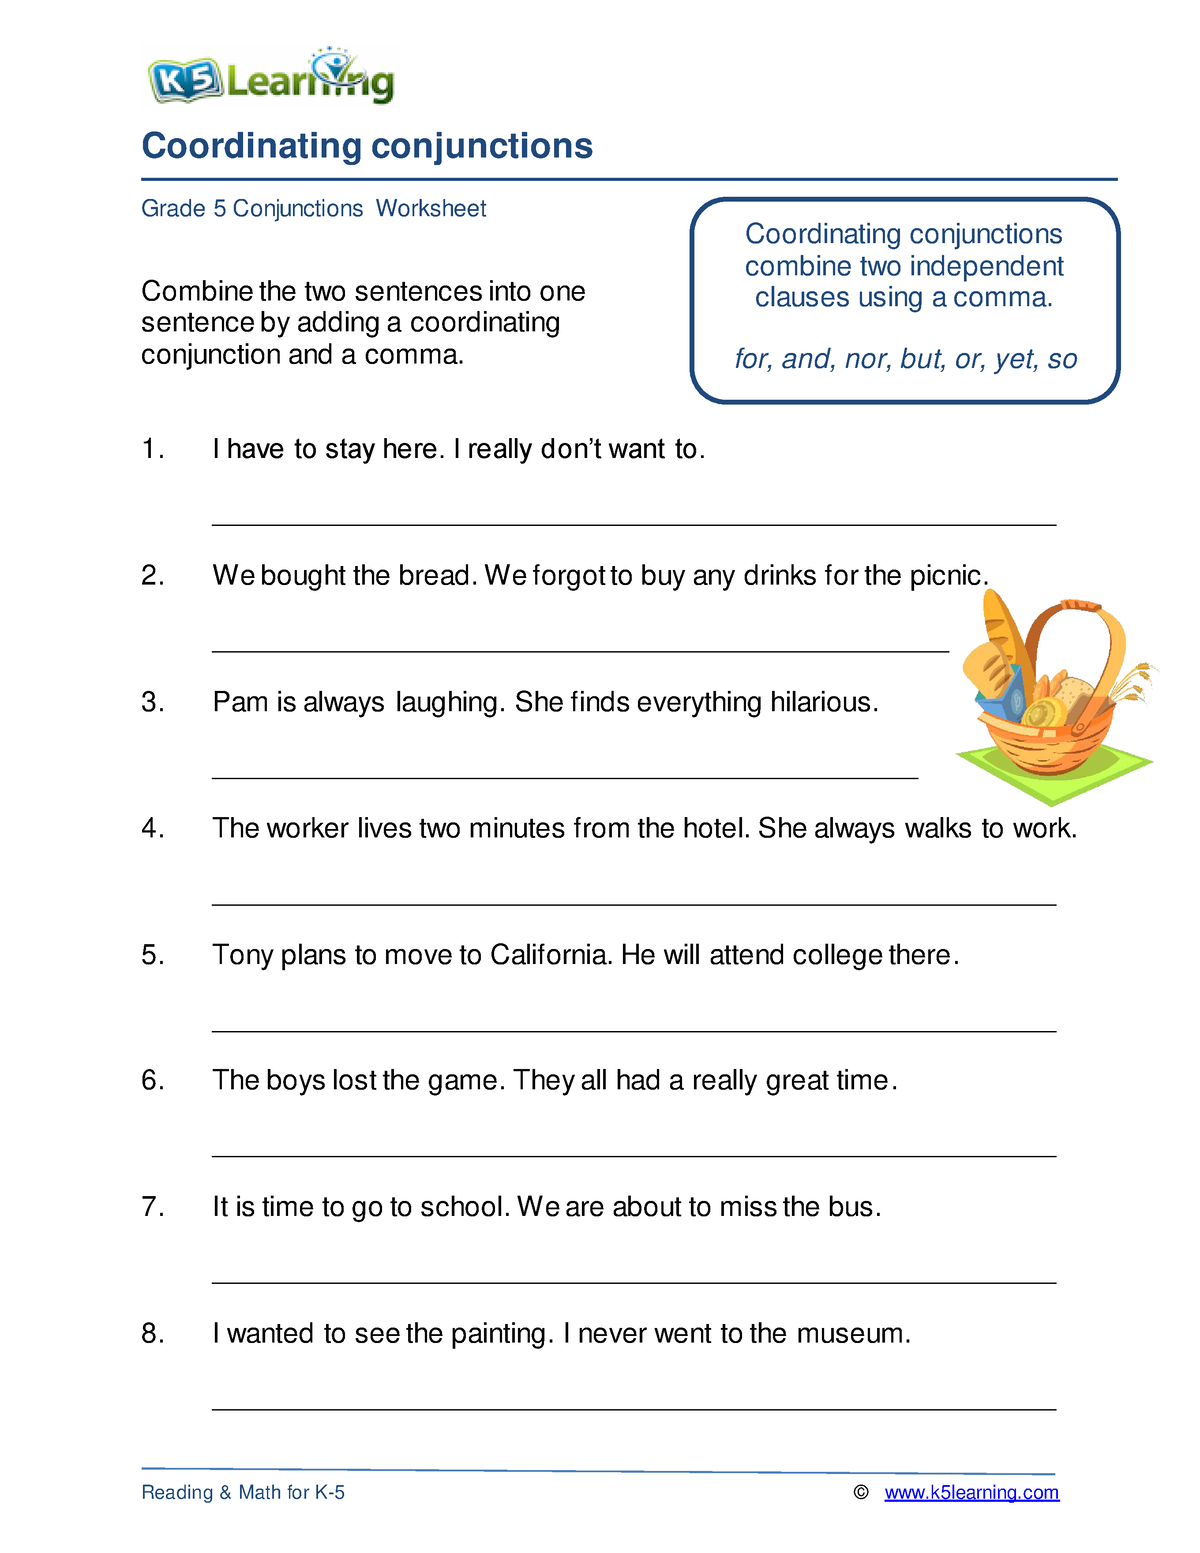 conjunctions-worksheets-printable-learning-how-to-read